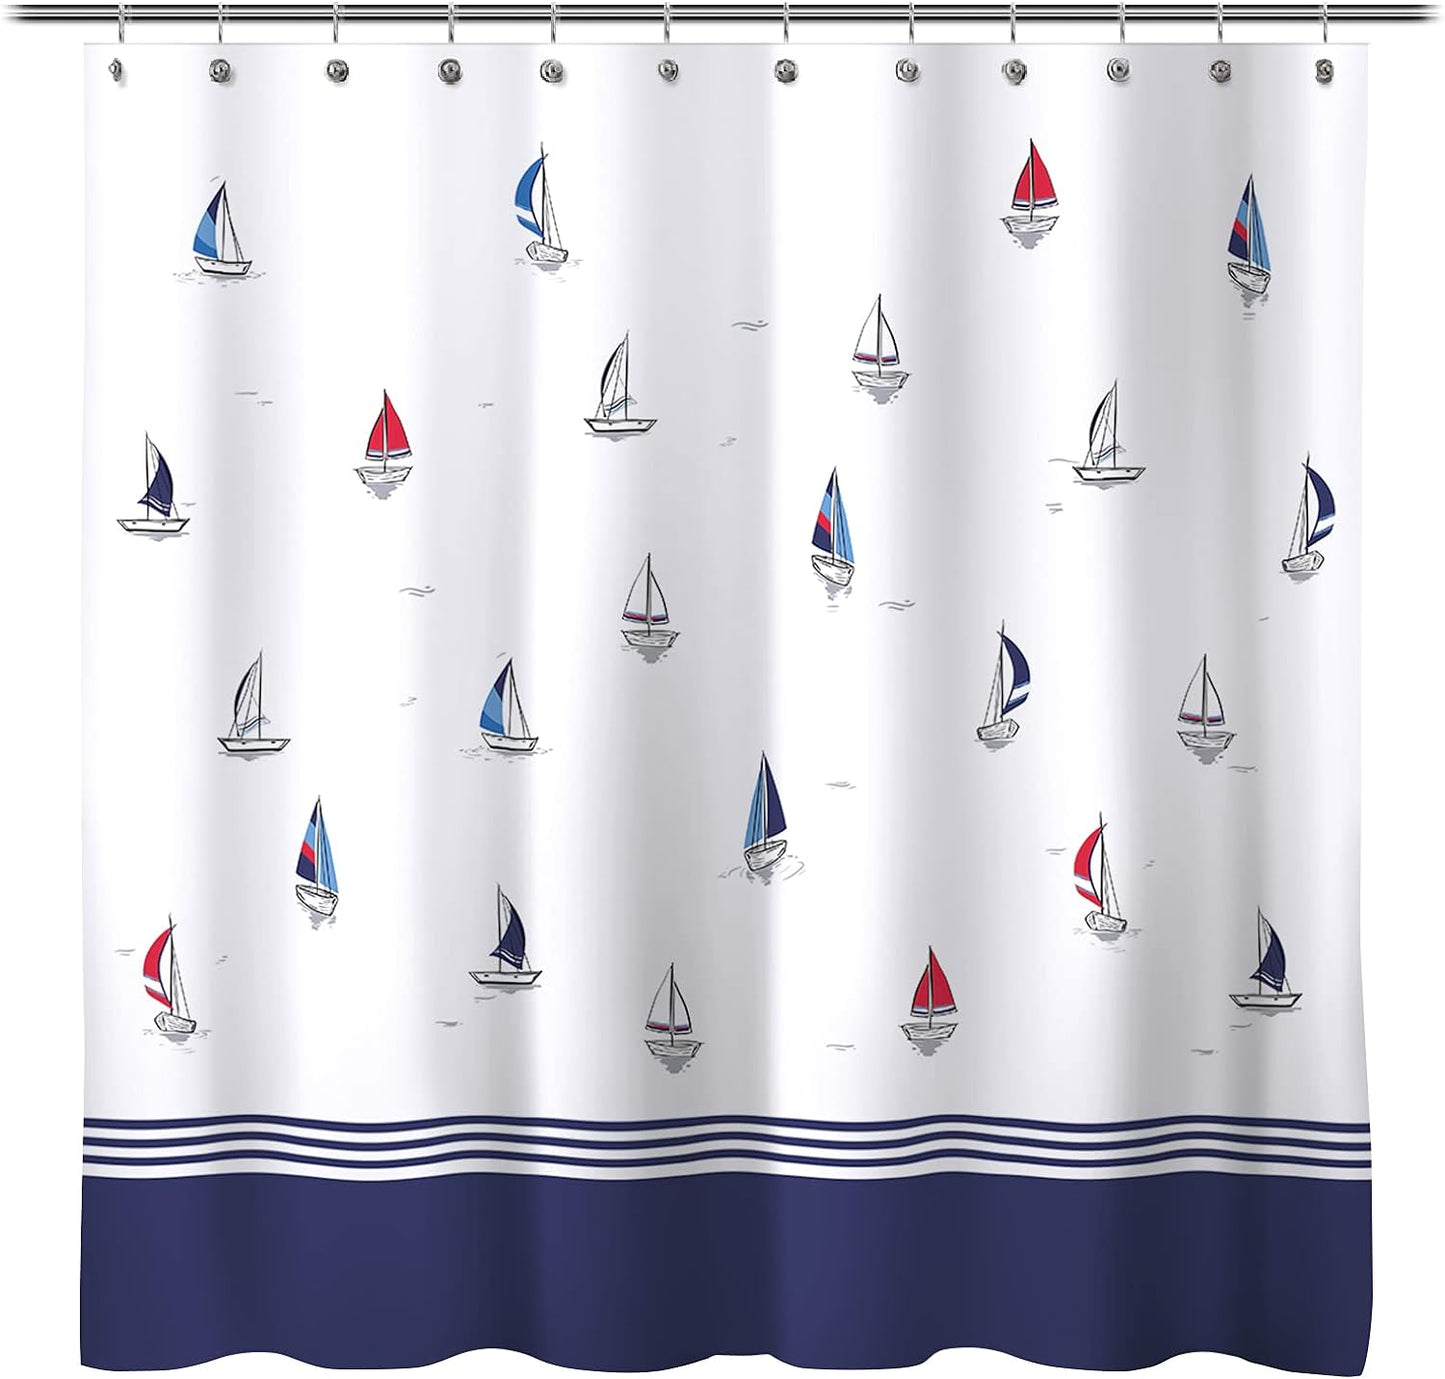 Sunlit Design Nautical Theme Fabric Shower Curtain, Navy Blue and Sailboats Color Block Stripes Shower Curtains Bathroom Decor Tapestry for Boys Children